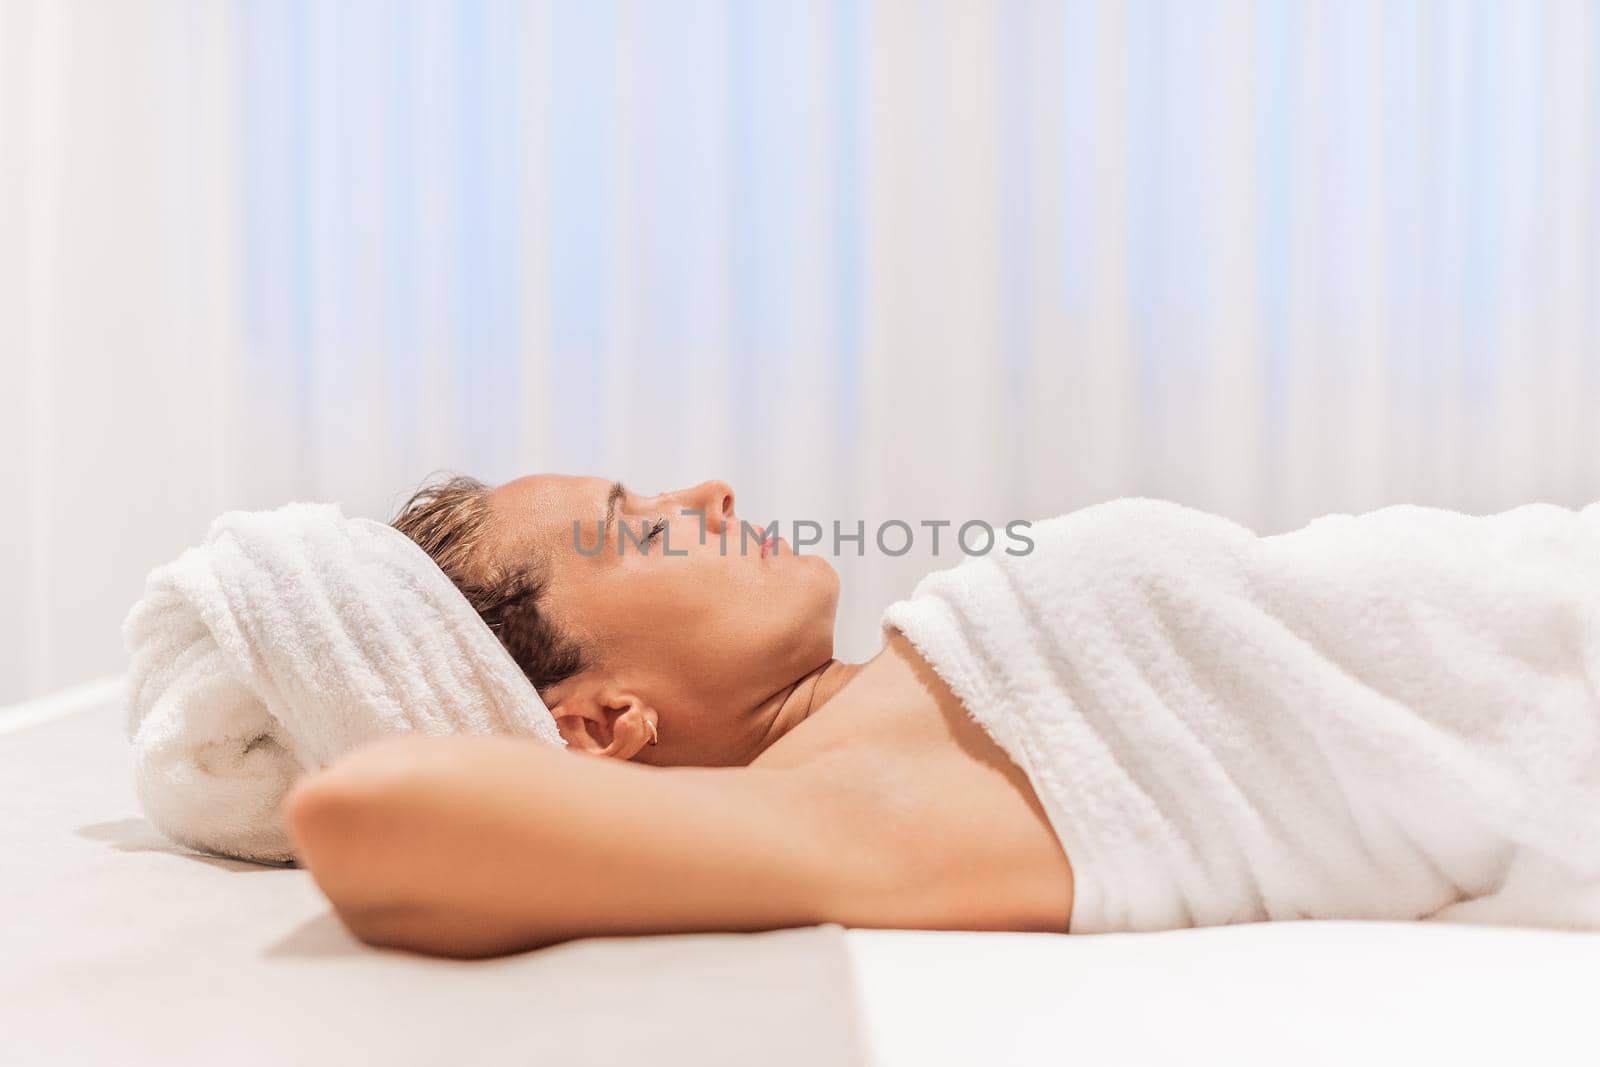 An adult woman wrapped in towels after showering lying in bed with her arms under her head and her eyes closed.